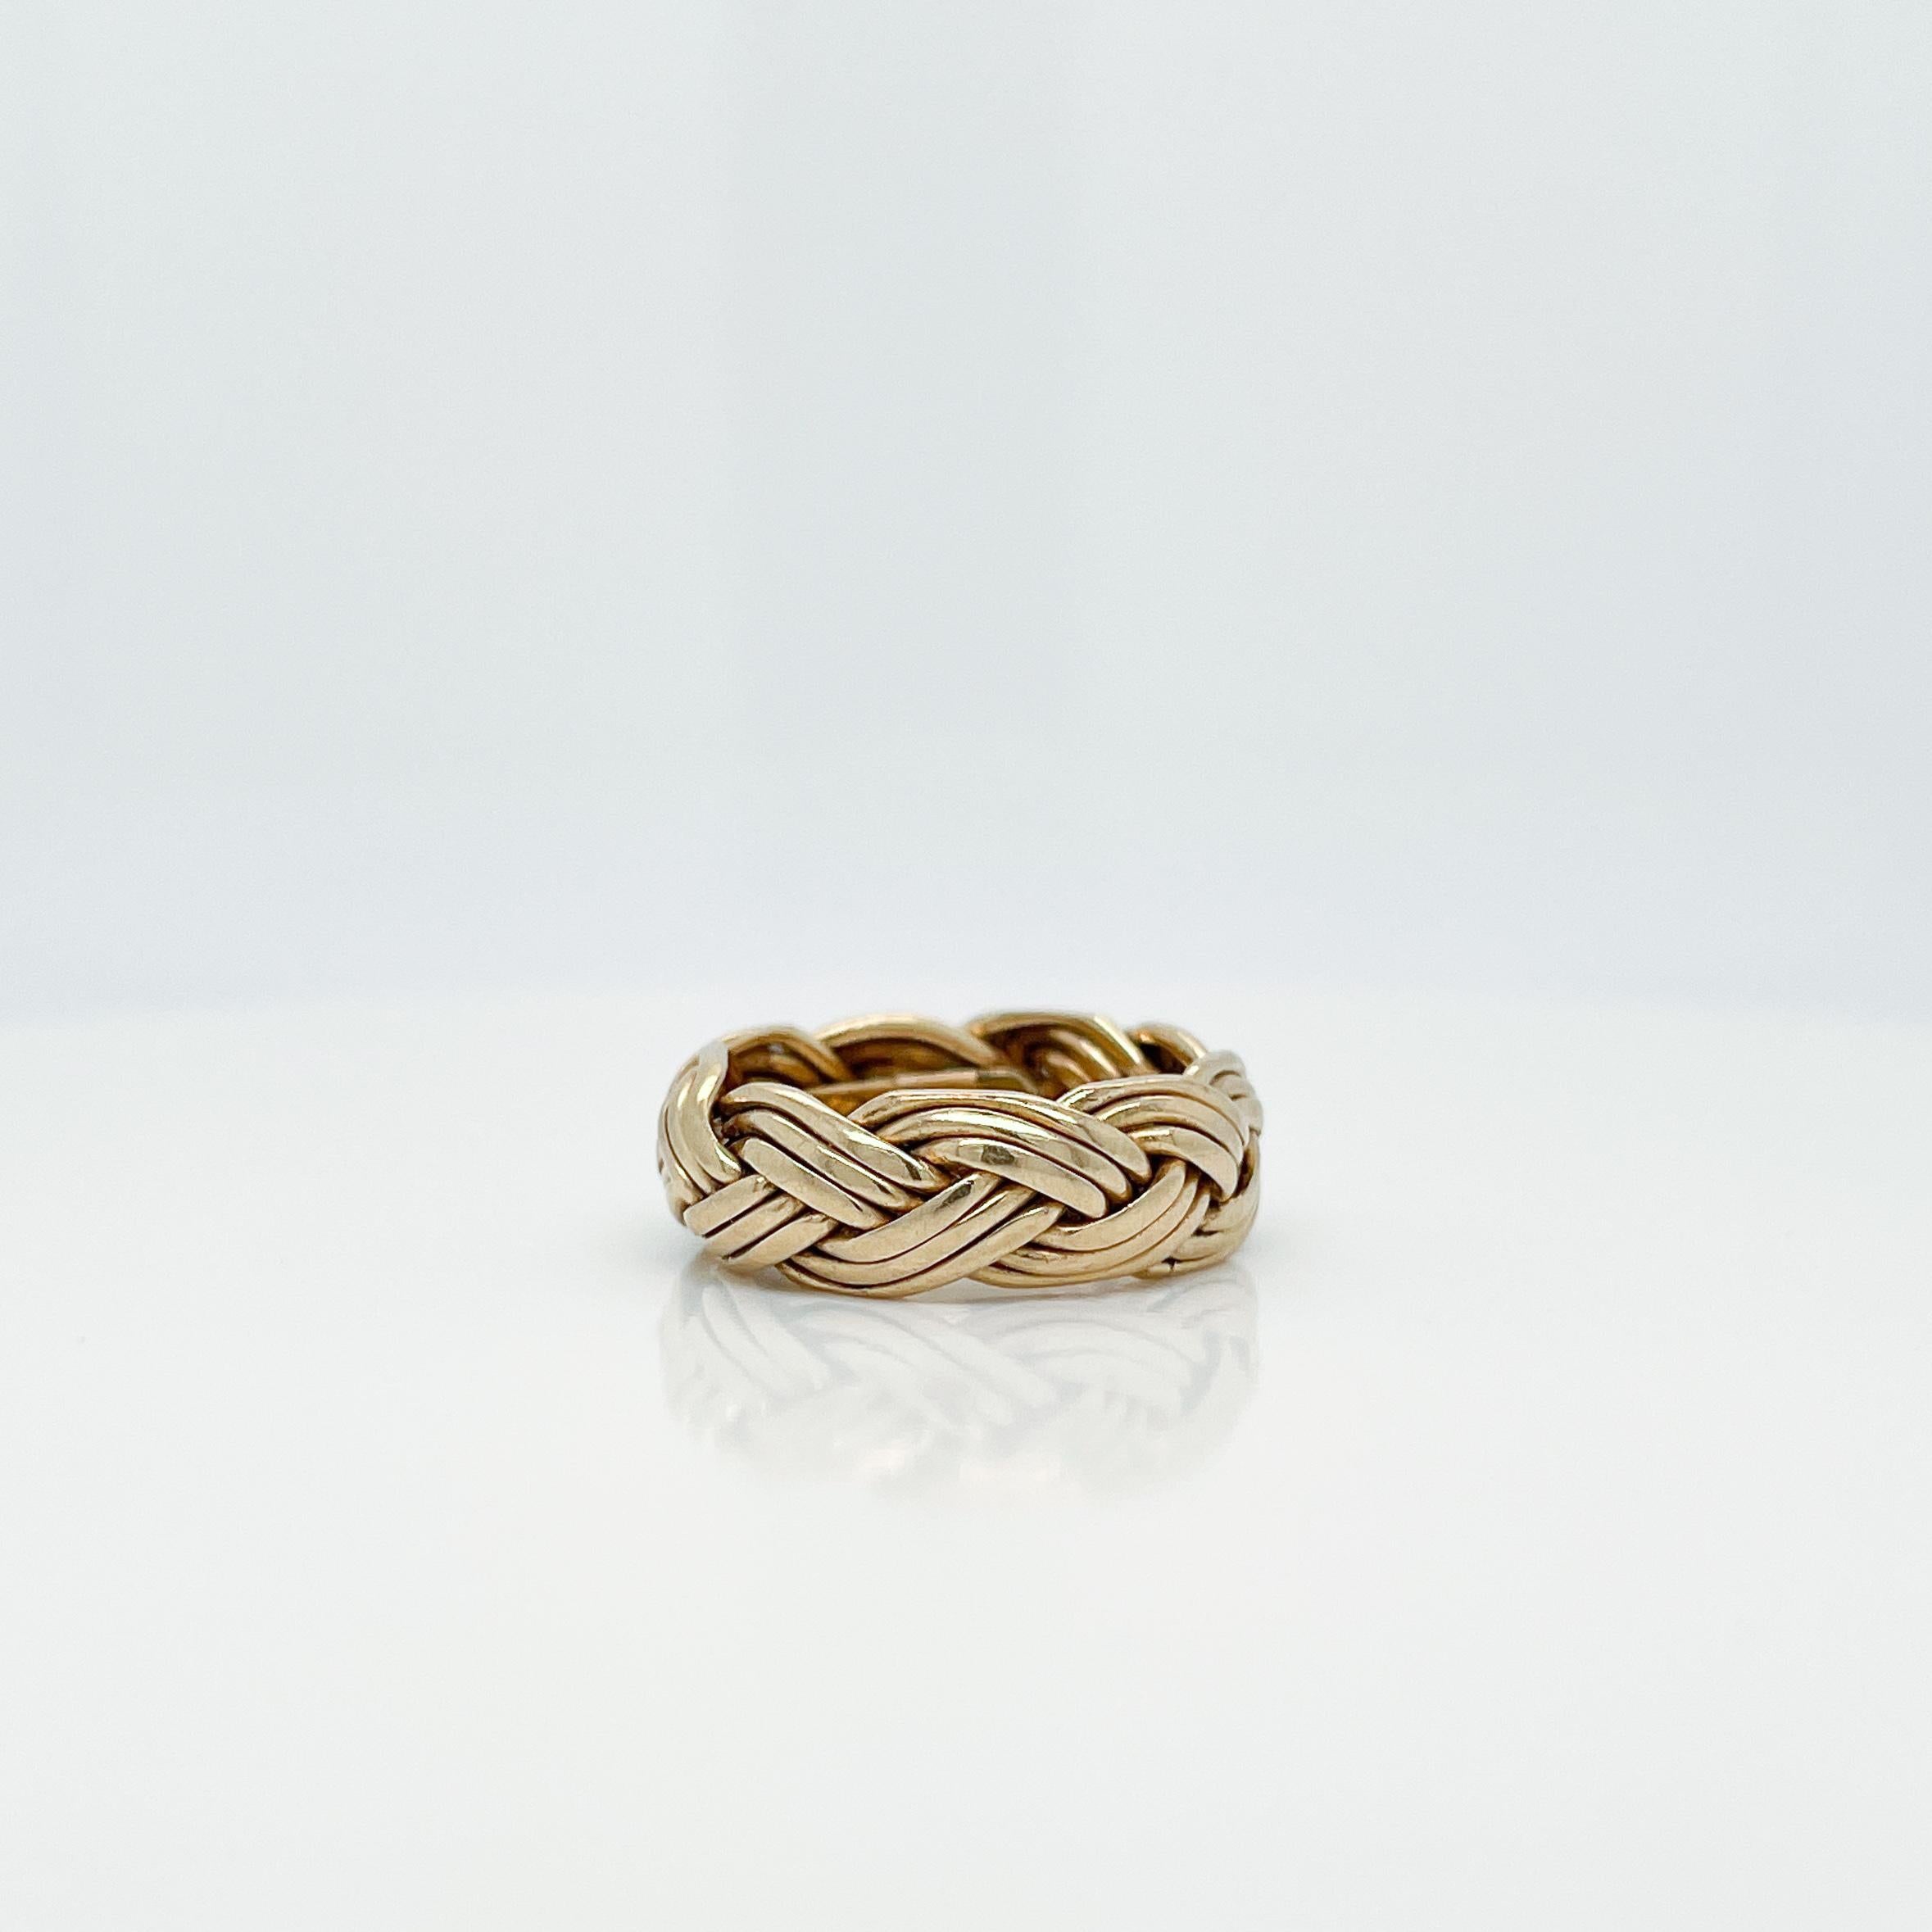 A fine braided band ring.

In 14k yellow gold.

By Tiffany & Co. 

Simply a terrific ring!

Date:
20th Century

Overall Condition:
It is in overall good, as-pictured, used estate condition.

Condition Details:
There is an added sizing band that